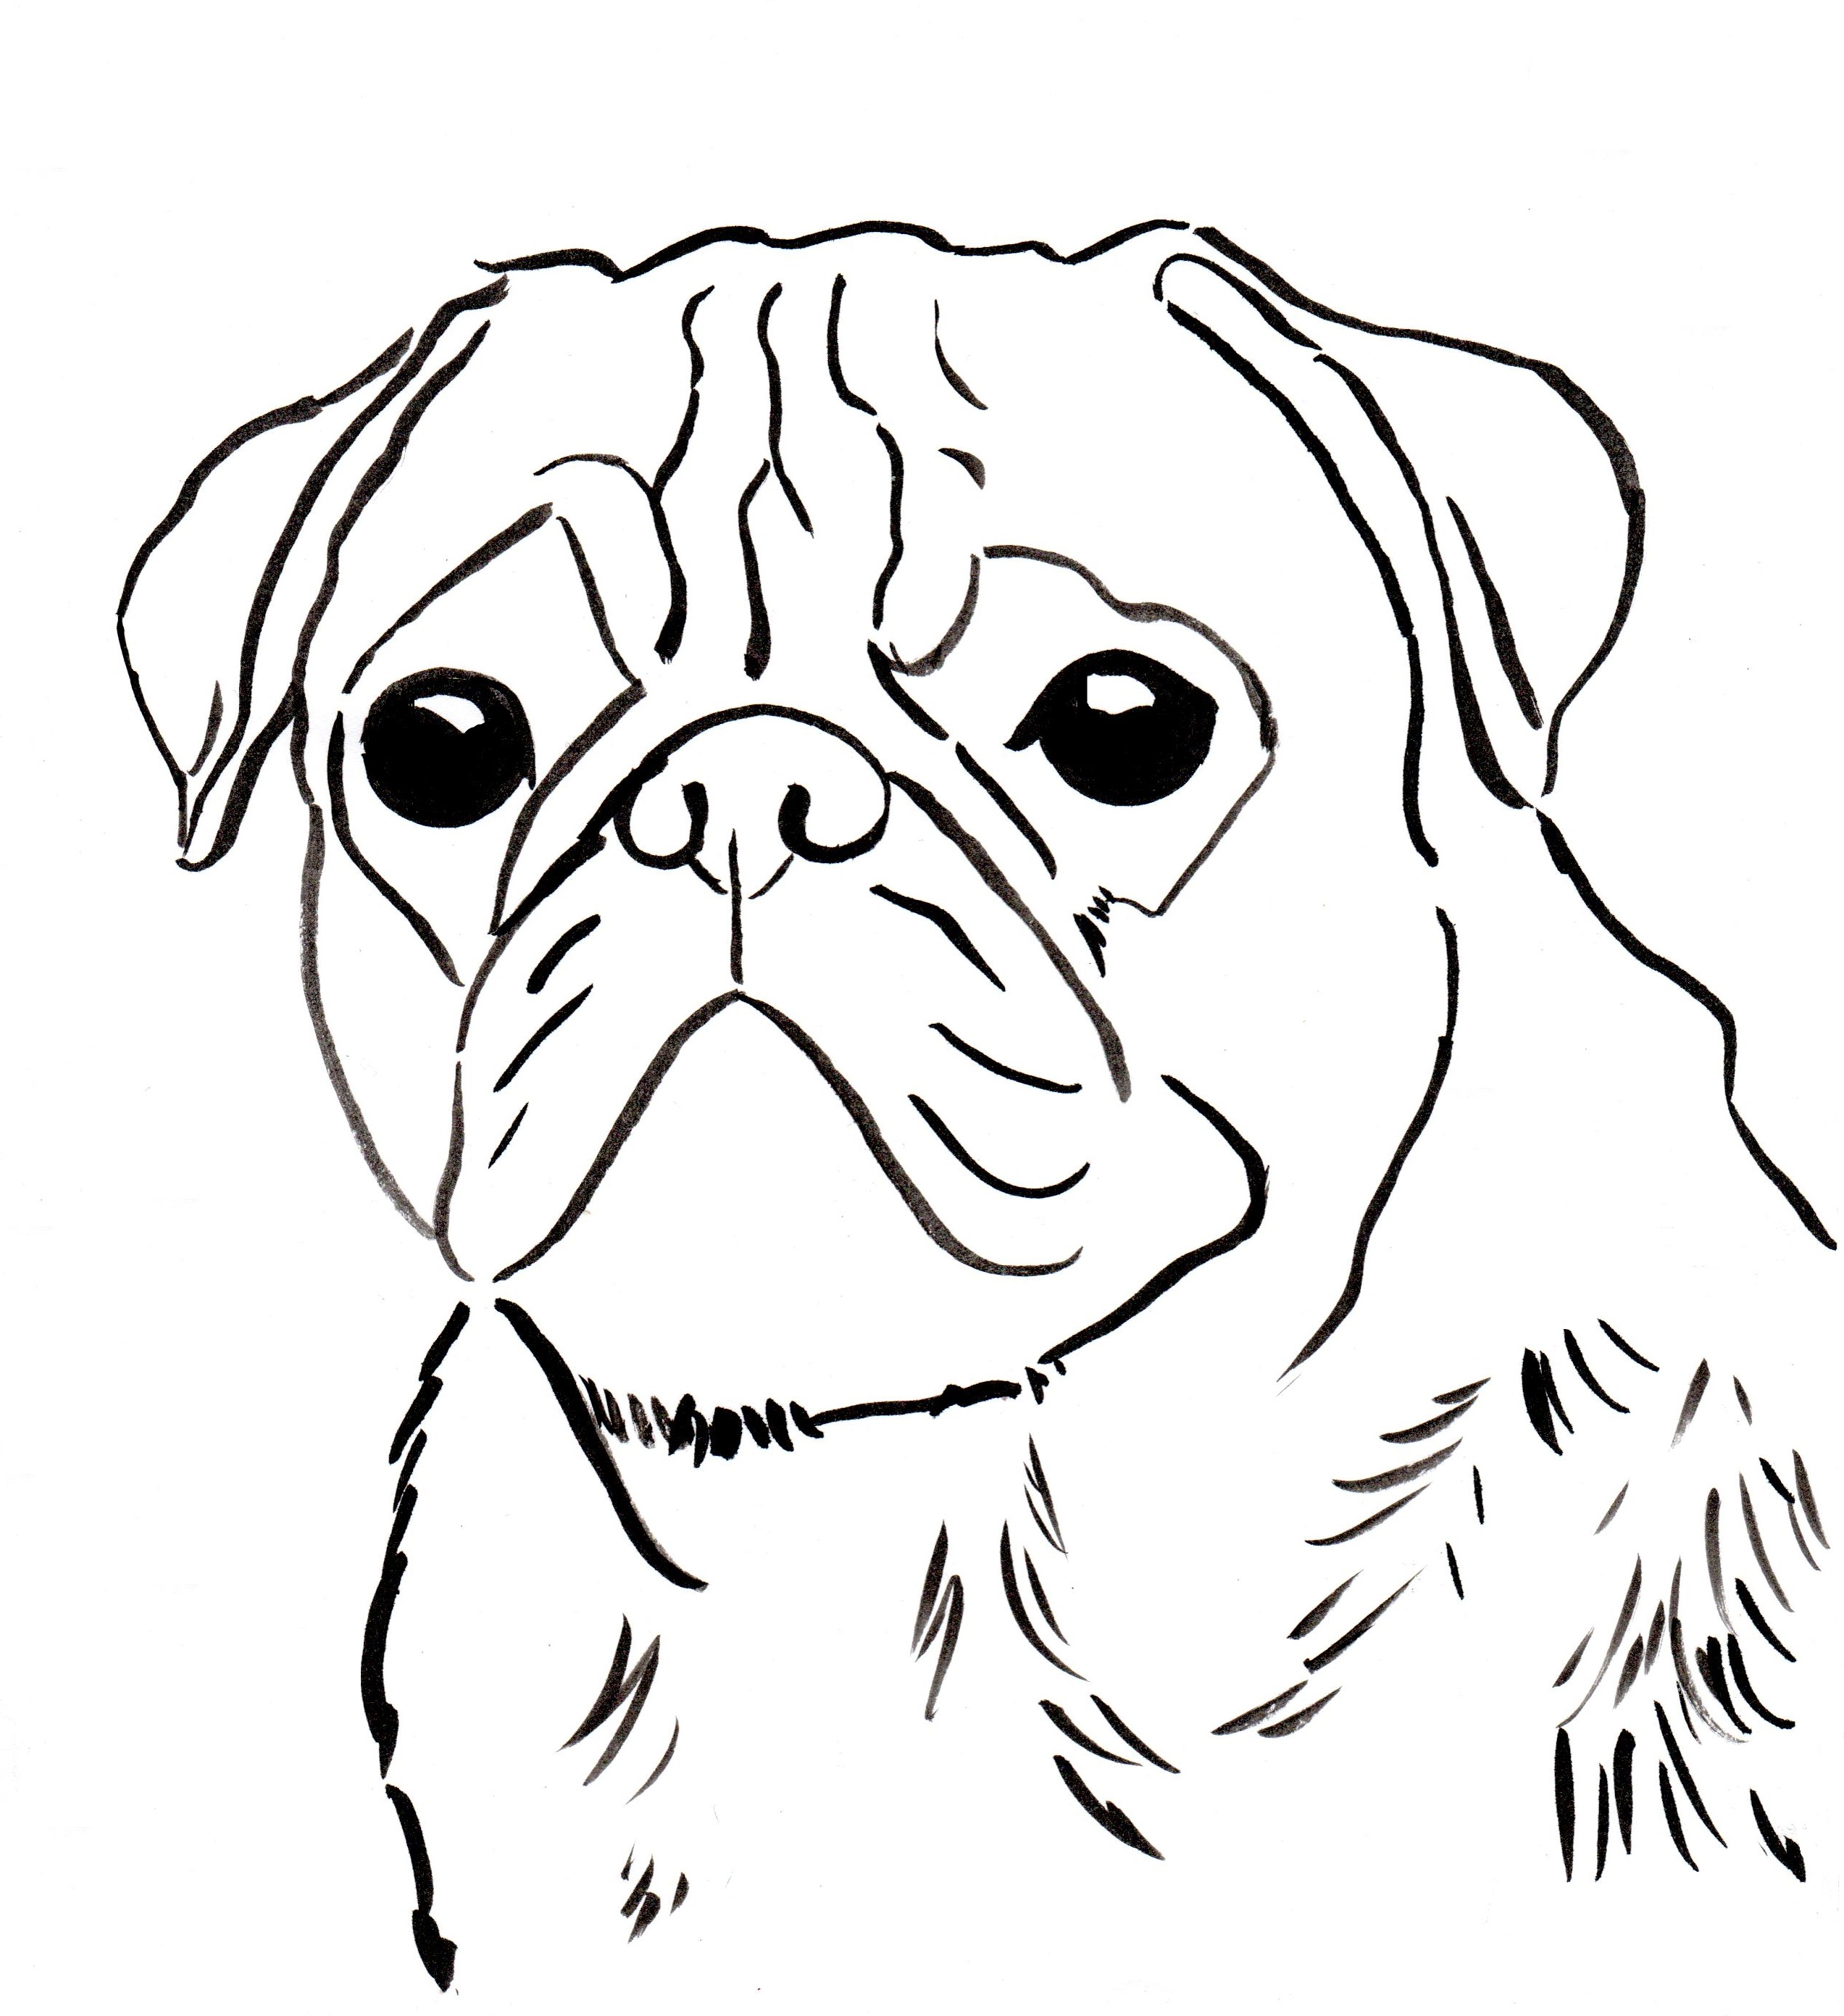 Pug Puppy Coloring Pages Coloring Cute Puppy Colorings Disney Free Printable Of Puppies New